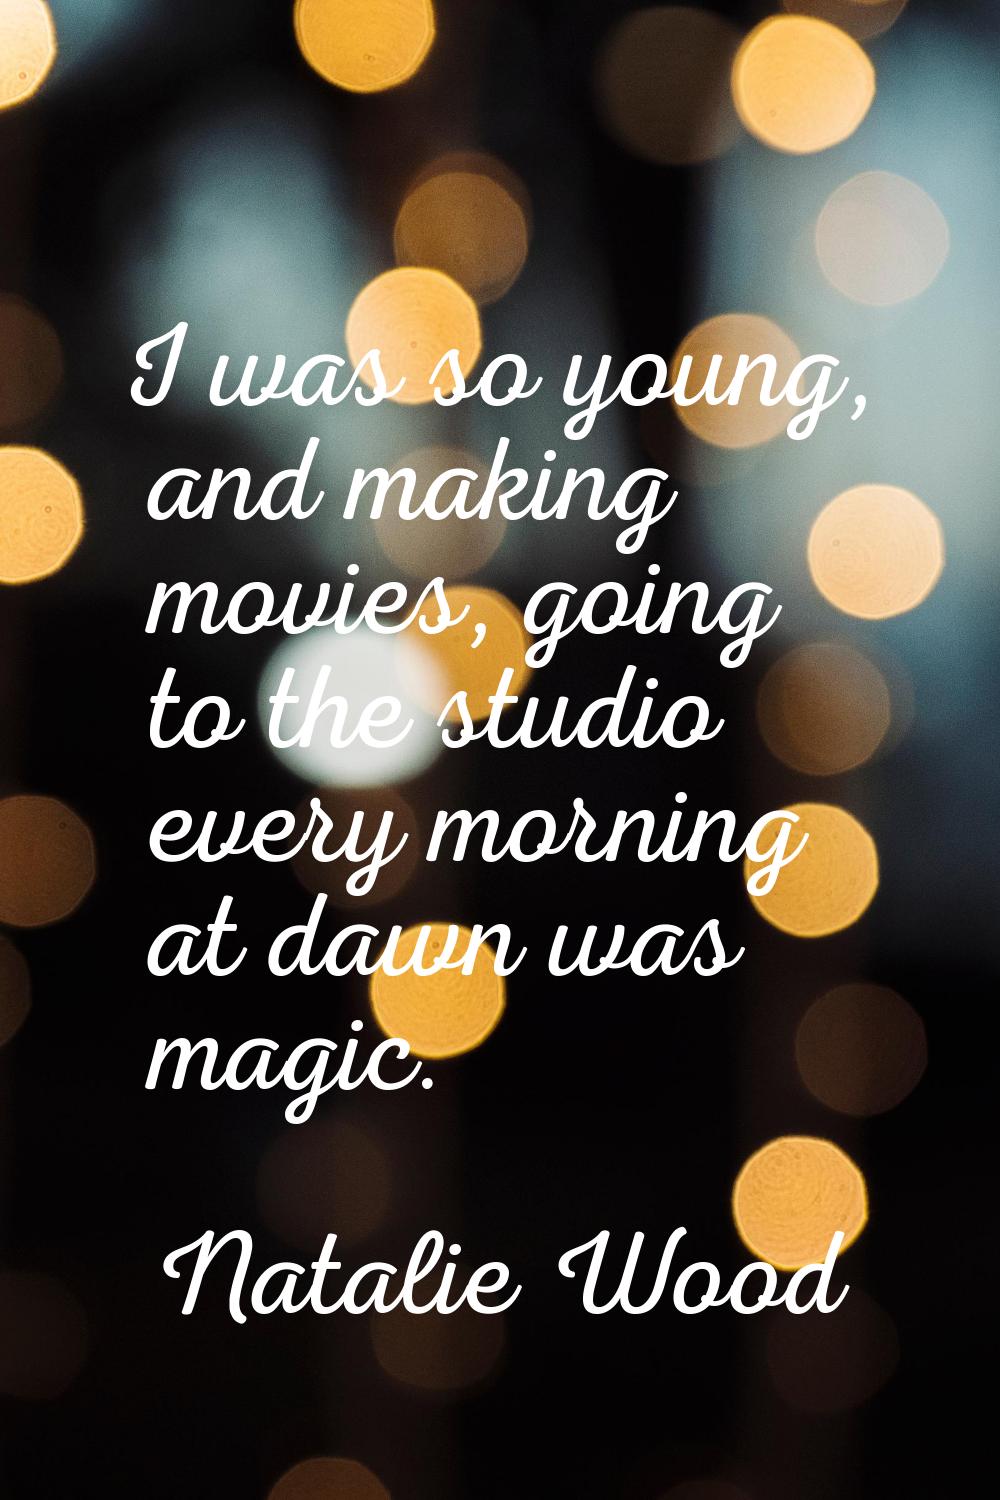 I was so young, and making movies, going to the studio every morning at dawn was magic.